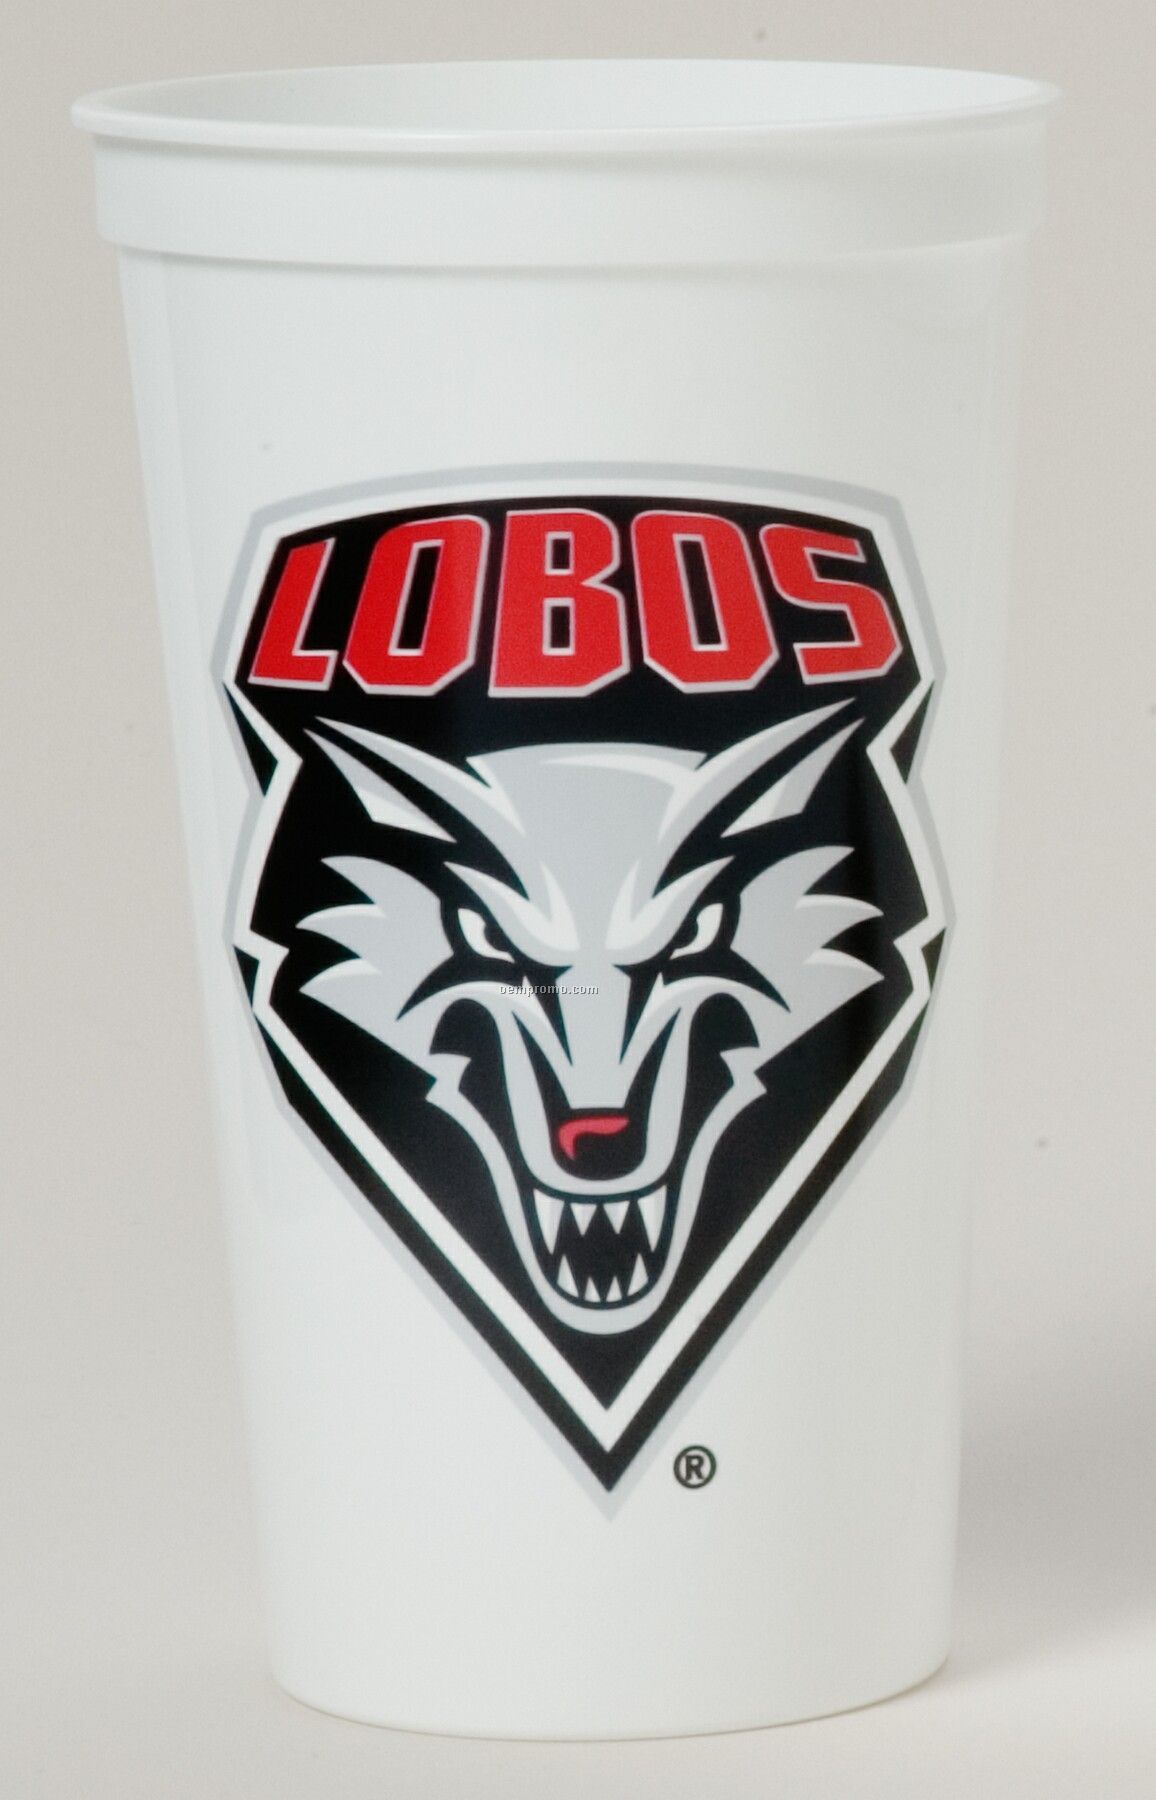 32 Oz. Smooth White Stadium Cup (2 Color Offset Imprint)